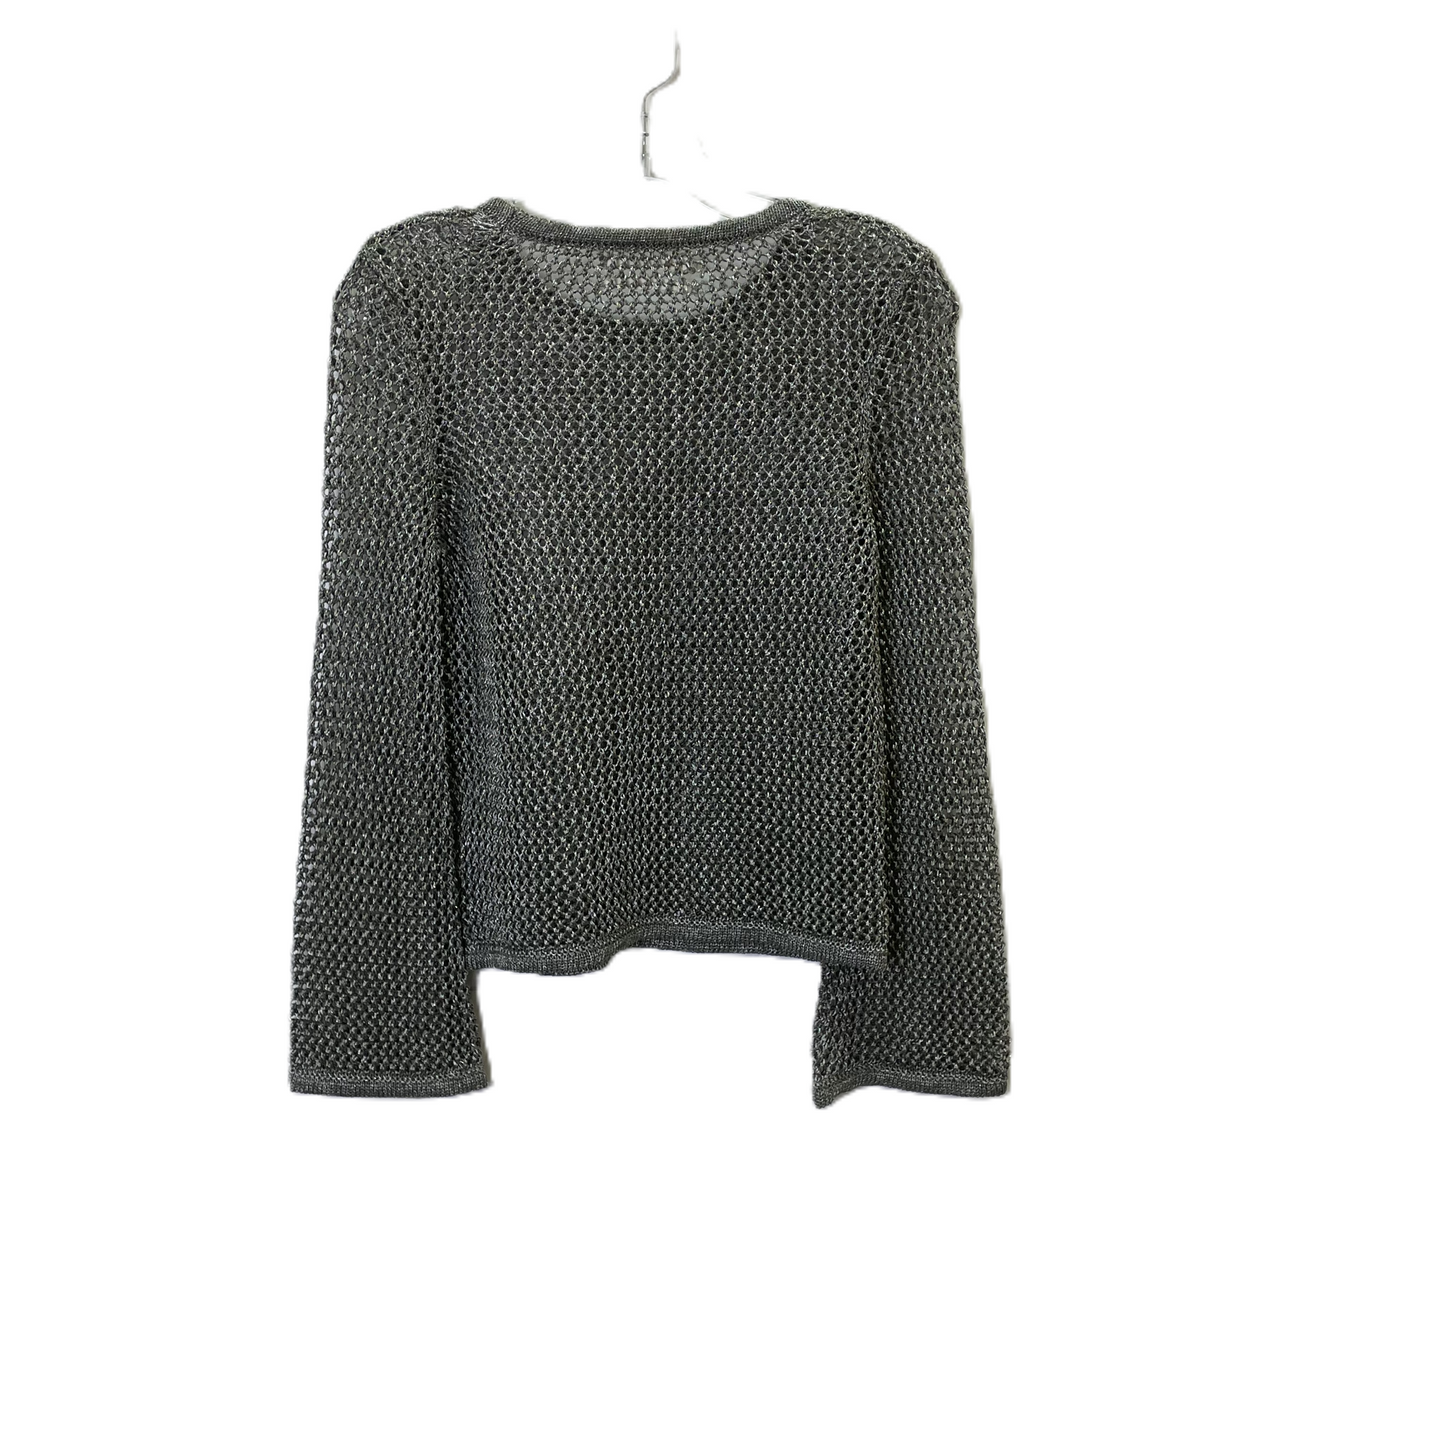 Sweater By Anthropologie  Size: Petite   Xs